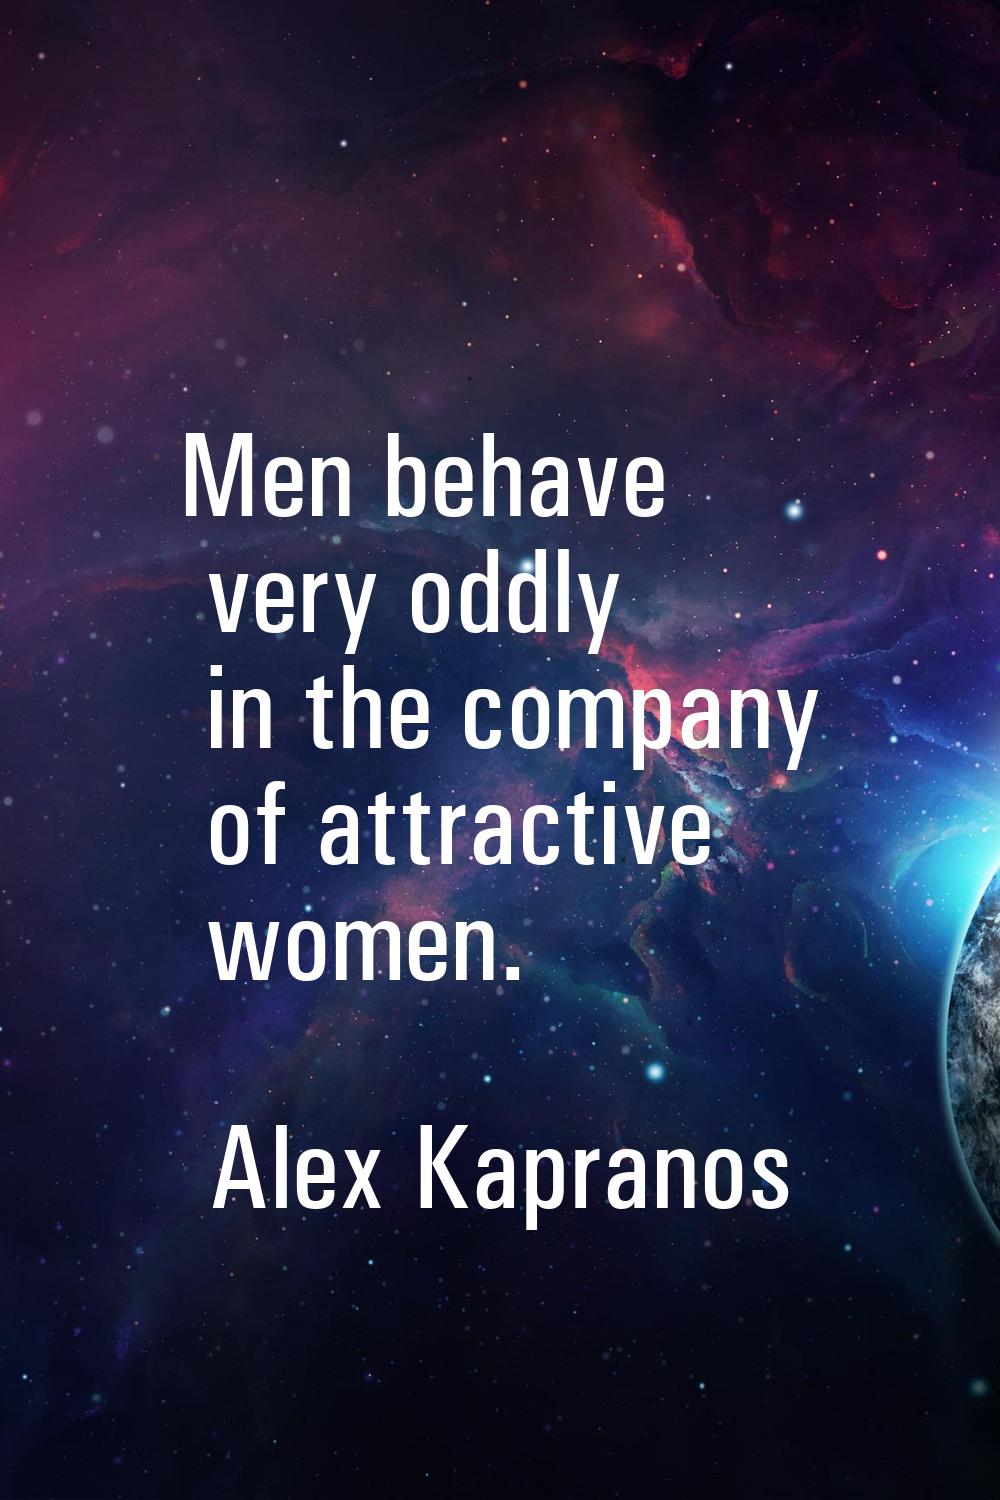 Men behave very oddly in the company of attractive women.